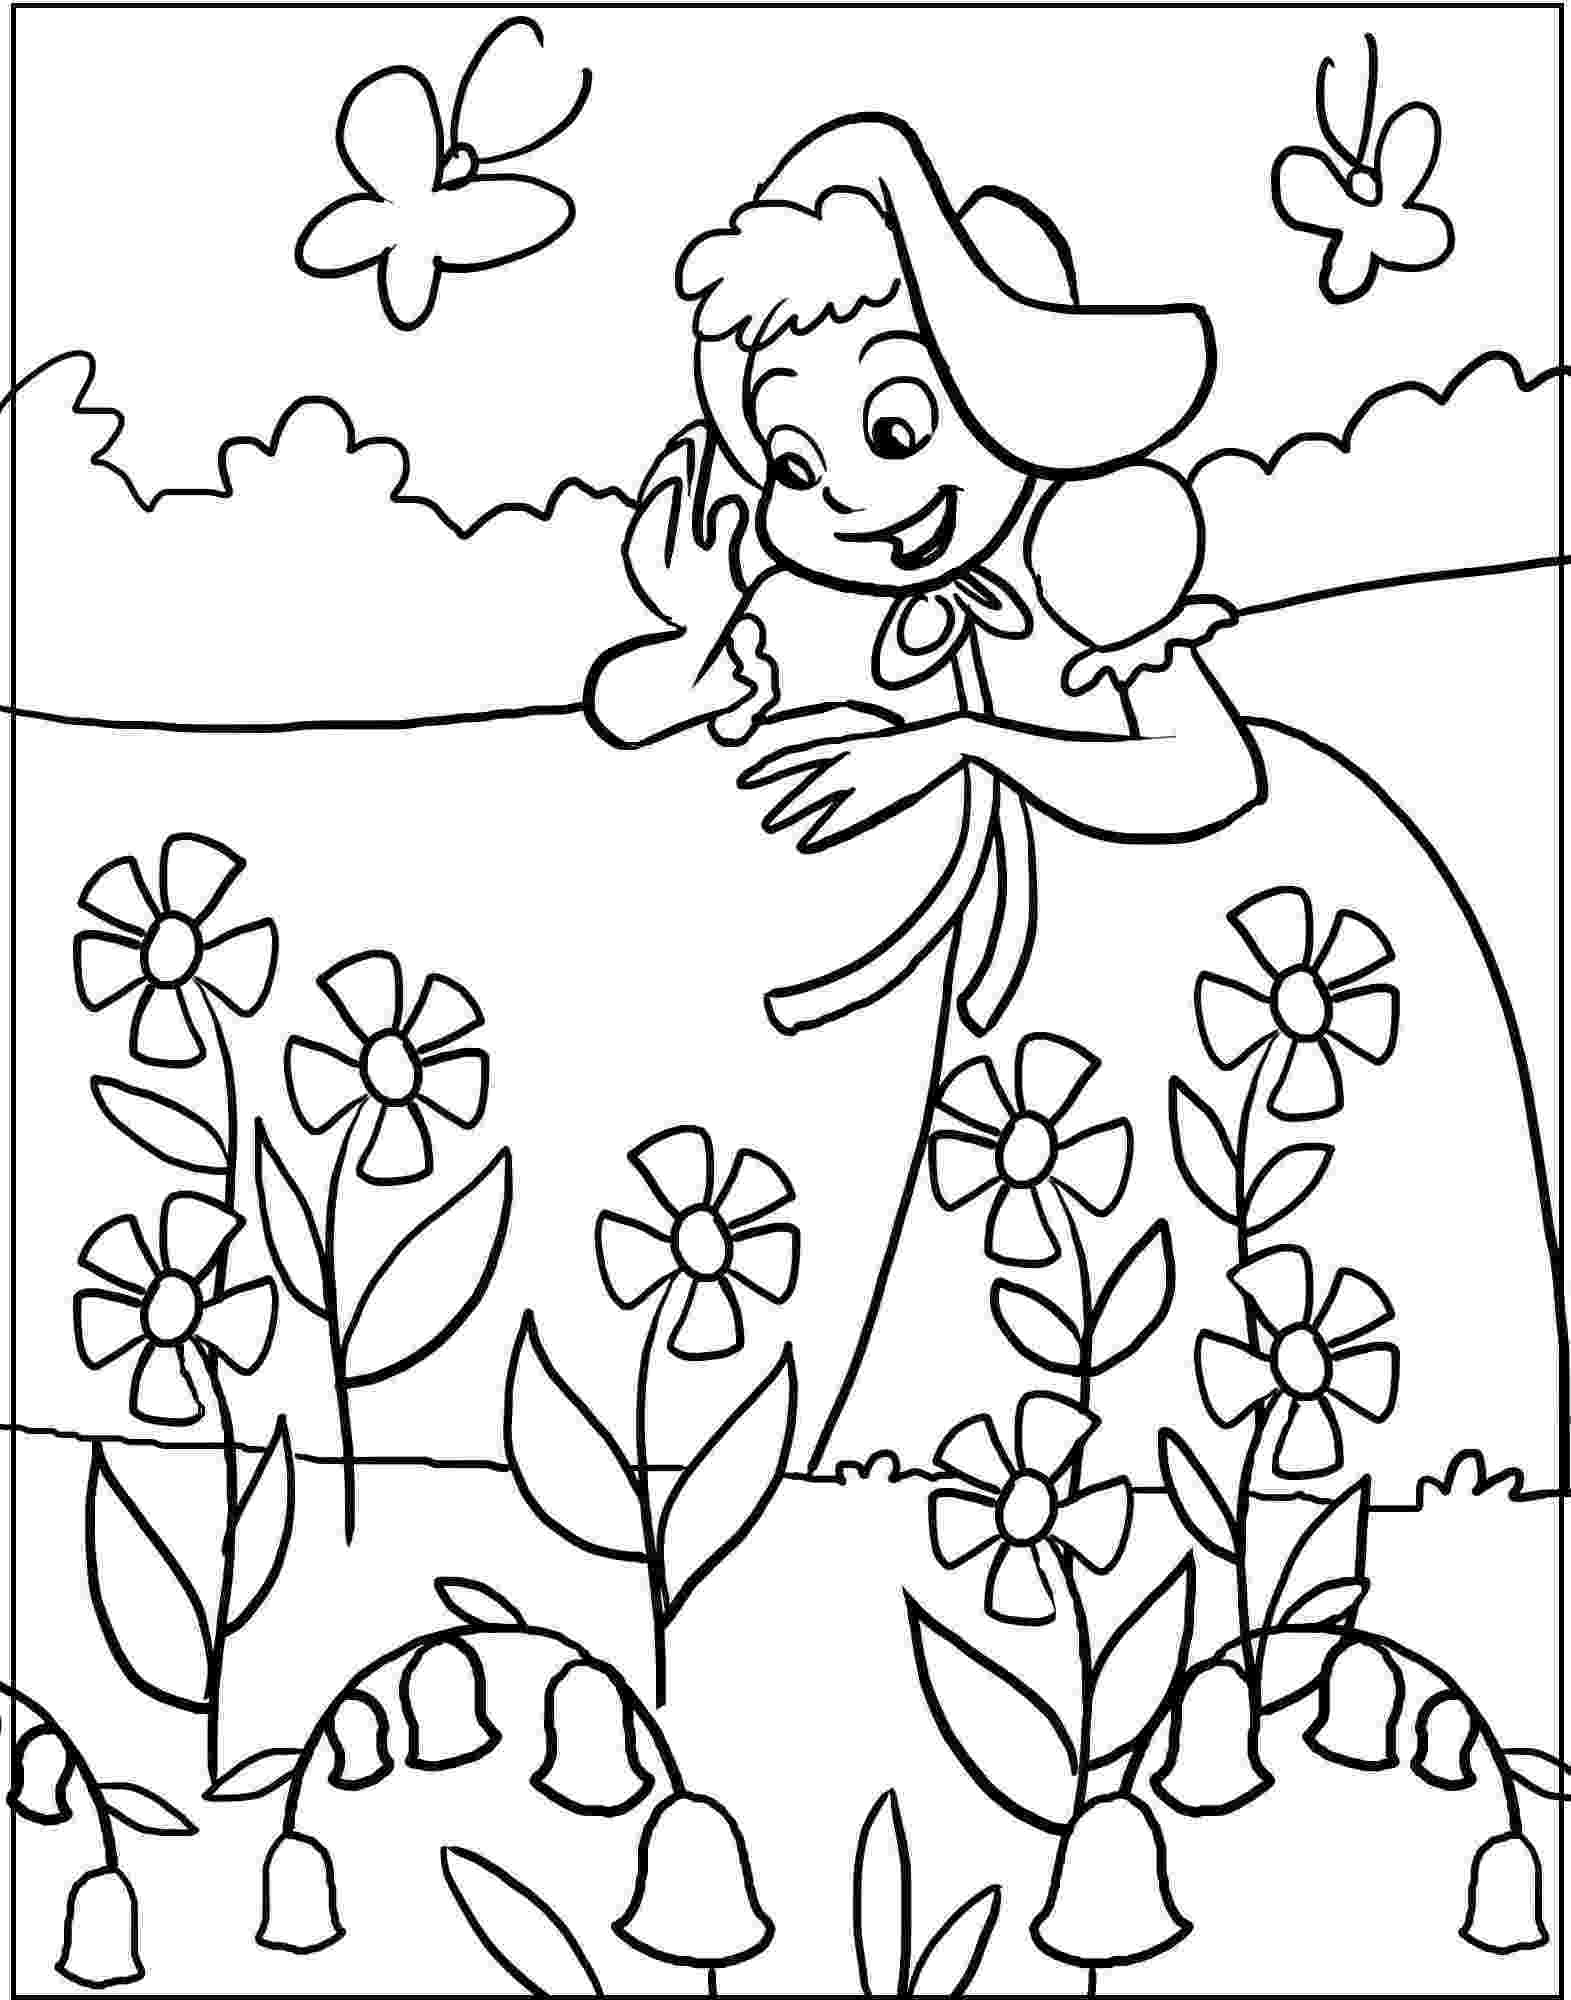 coloring pages of spring flowers free spring coloring pages for adults the country chic flowers spring pages coloring of 